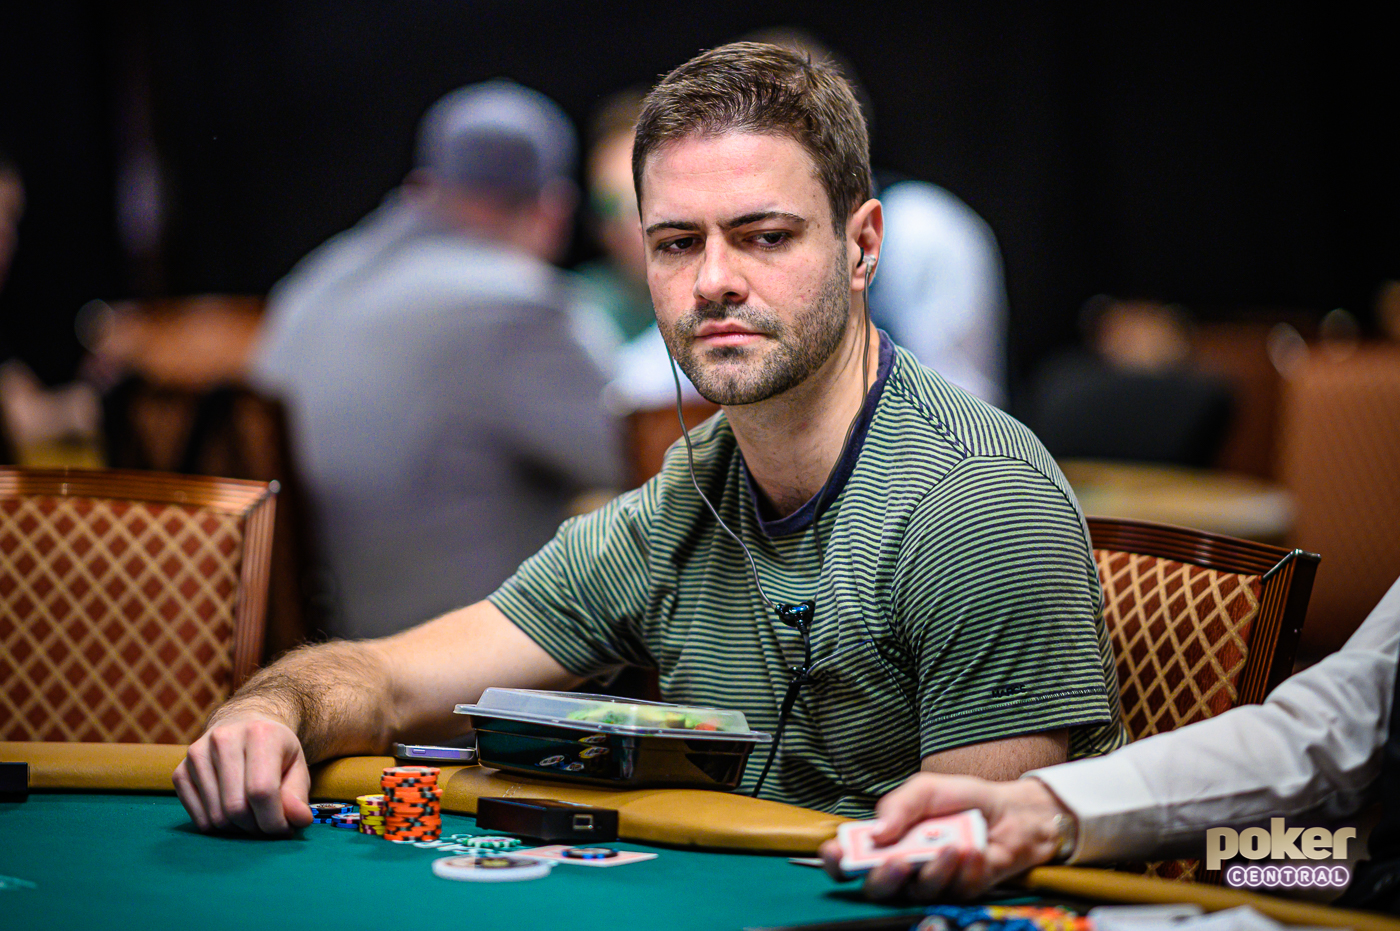 James Obst in action during the 2019 World Series of Poker.